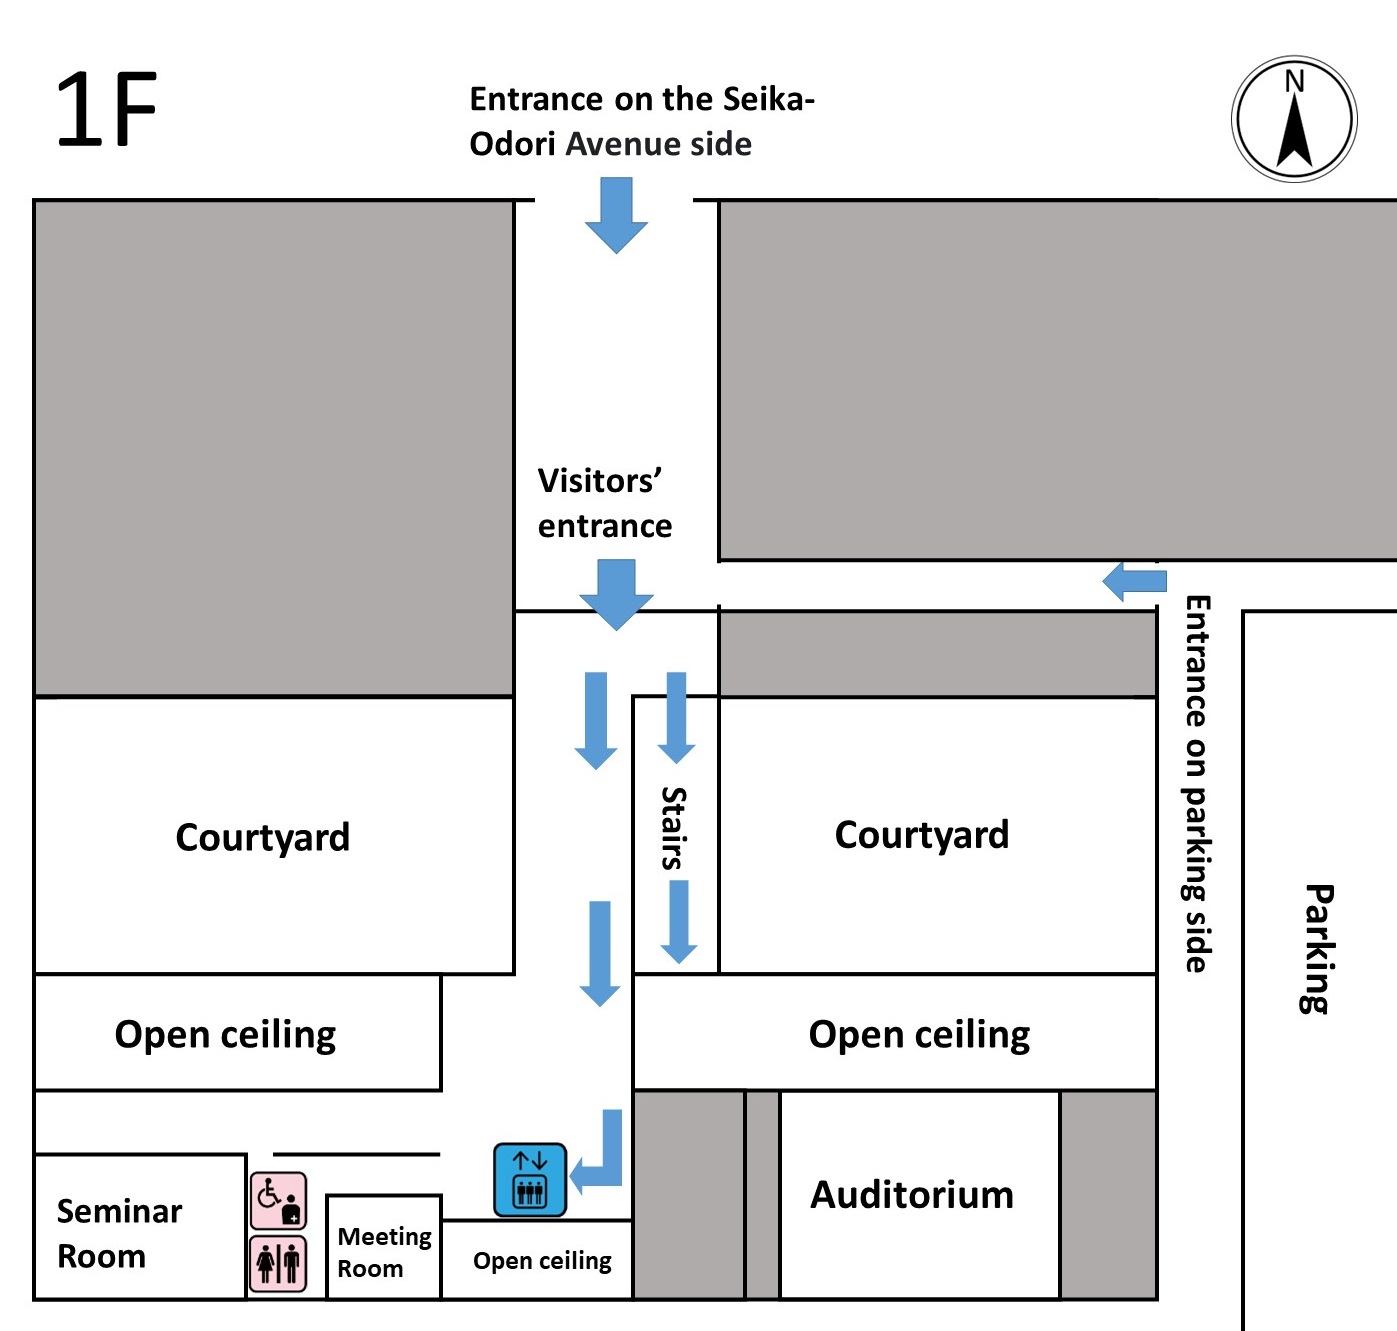 This is the floor map of the 1st floor of the Kansai-kan of the National Diet Library. It shows the location of the visitors' entrance, the location of the stairs, and the location of the elevator. Go straight about 10 meters from the visitors' entrance and you will find descending stairs. There is an elevator about 45 meters down the corridor on the right side of the stairs. Braille blocks guide you from the front of the stairs to the elevator.